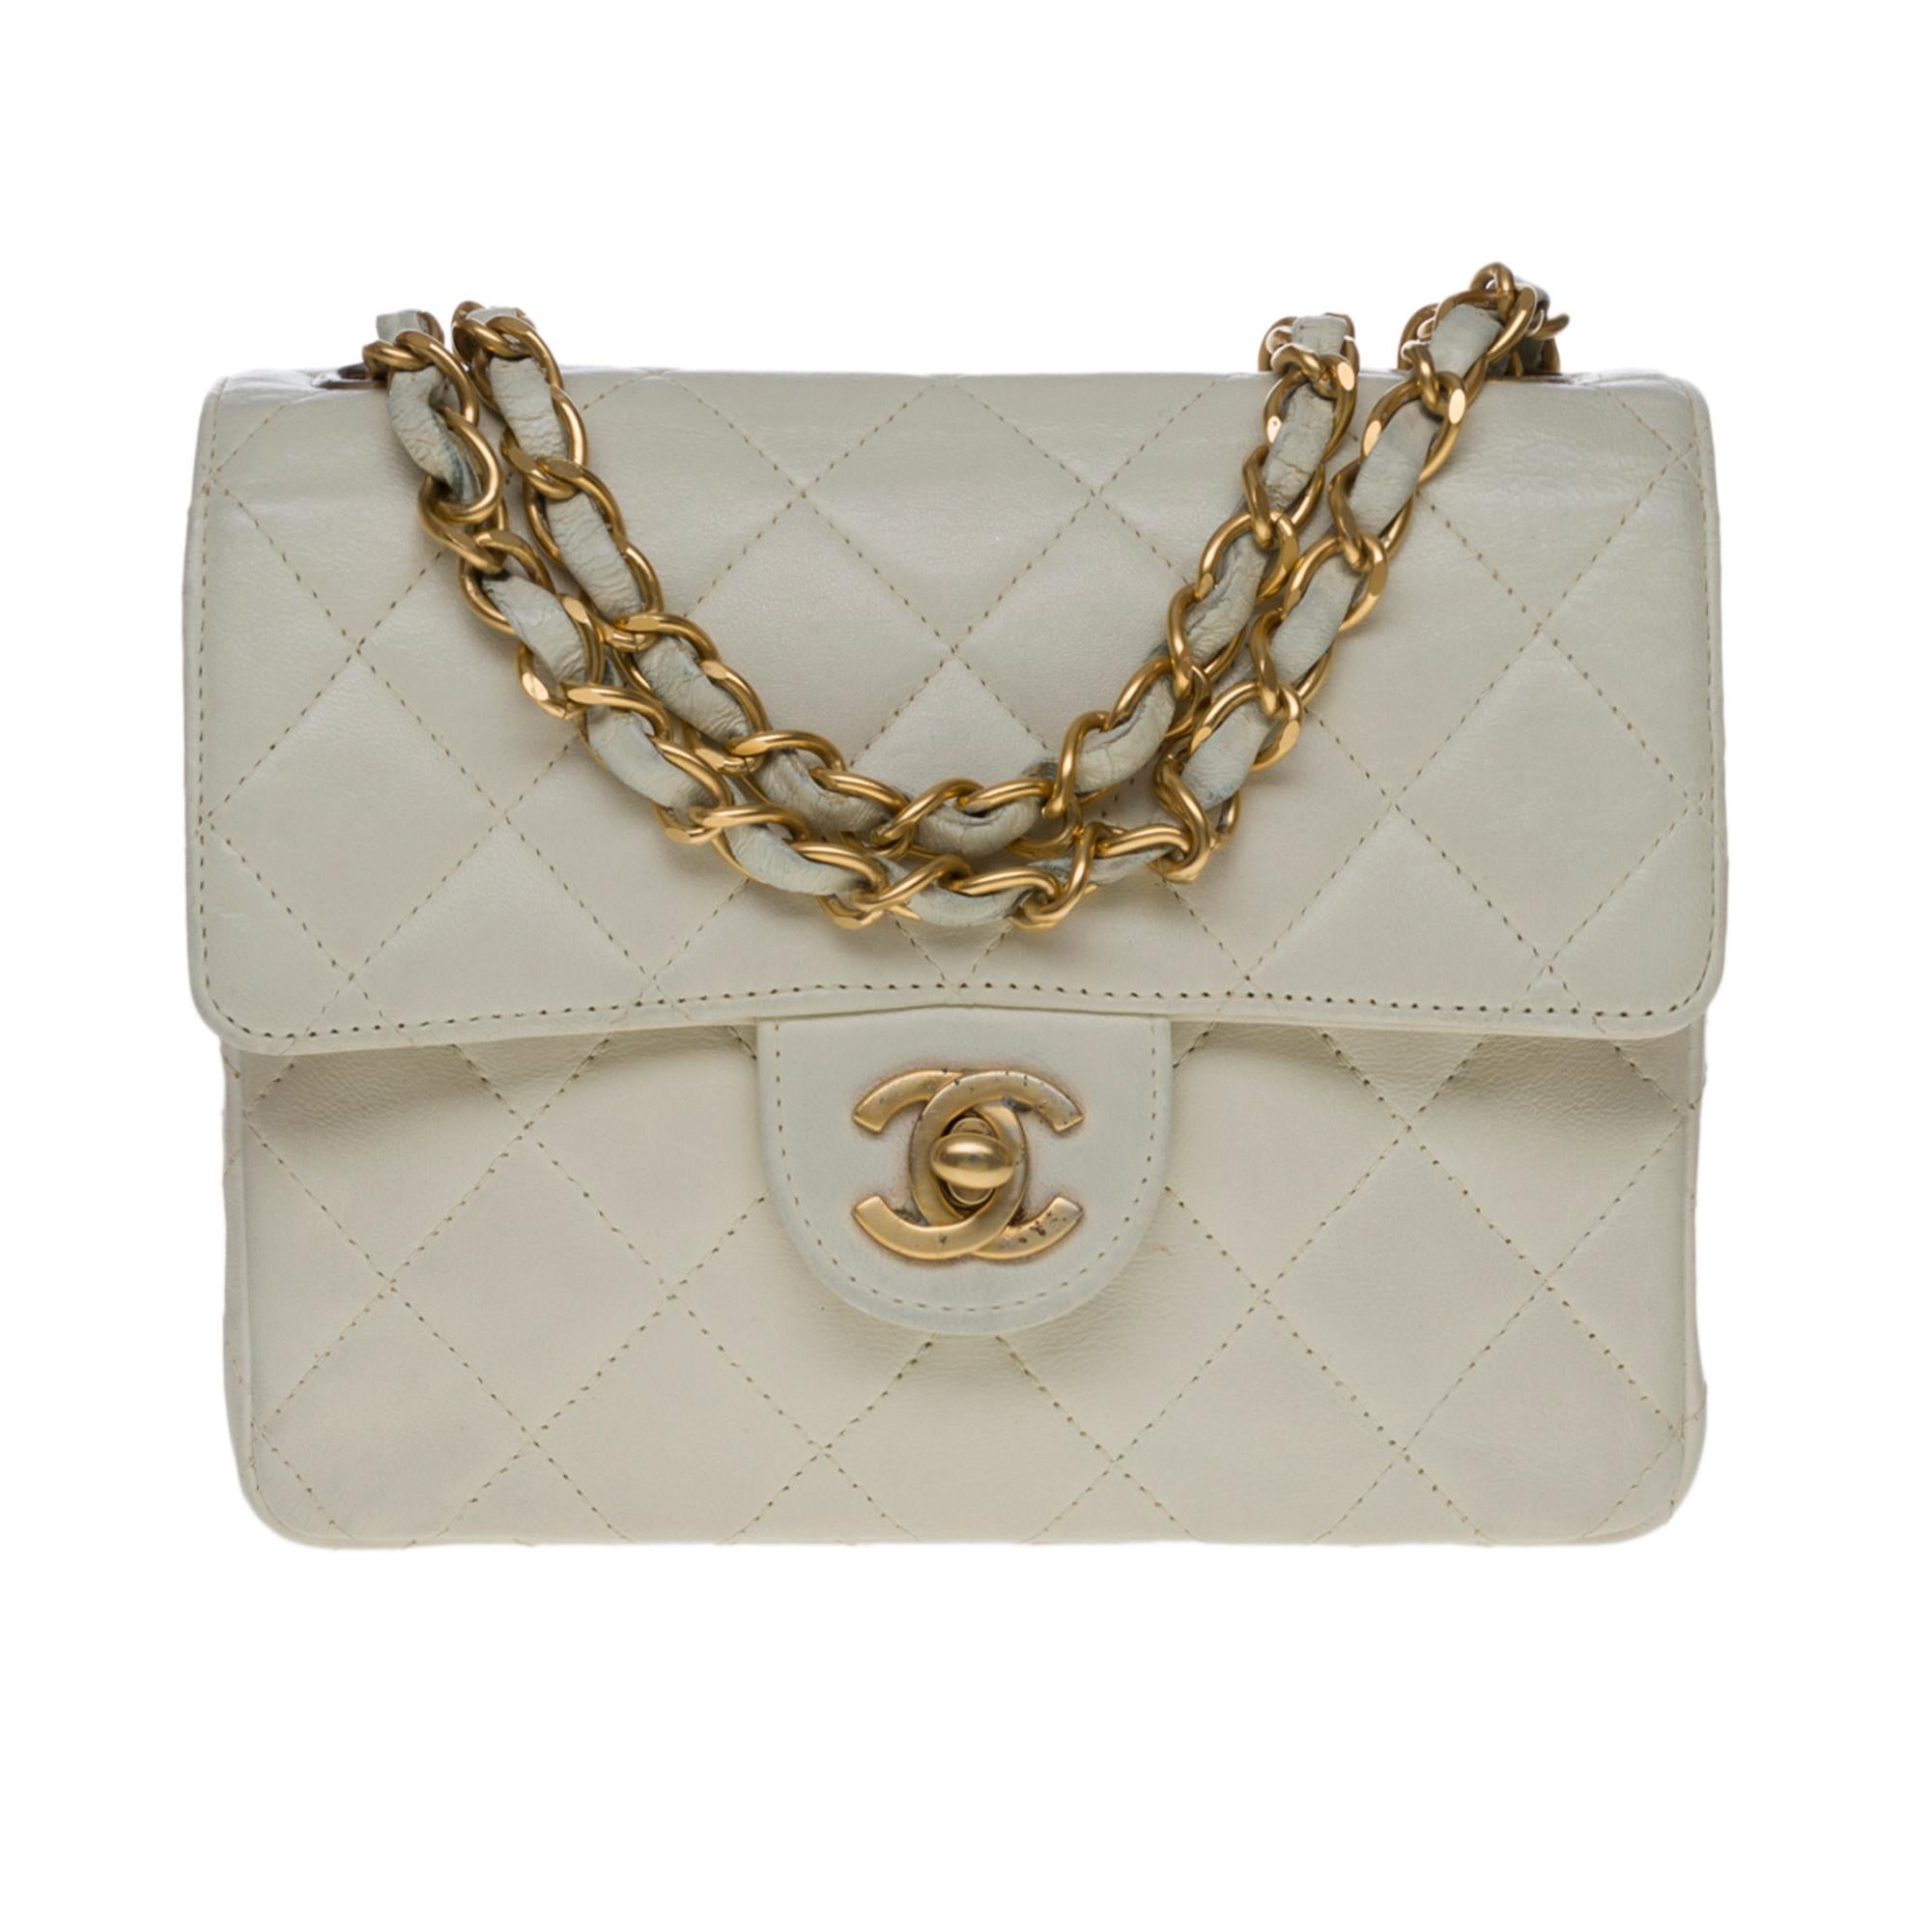 Lovely Chanel Timeless Mini shoulder bag in off-white quilted lambskin leather, gold-tone hardware, a gold-tone chain handle interlaced with off-white leather for shoulder and a shoulder strap
Pocket on the back of the bag
Flap closure with gold CC